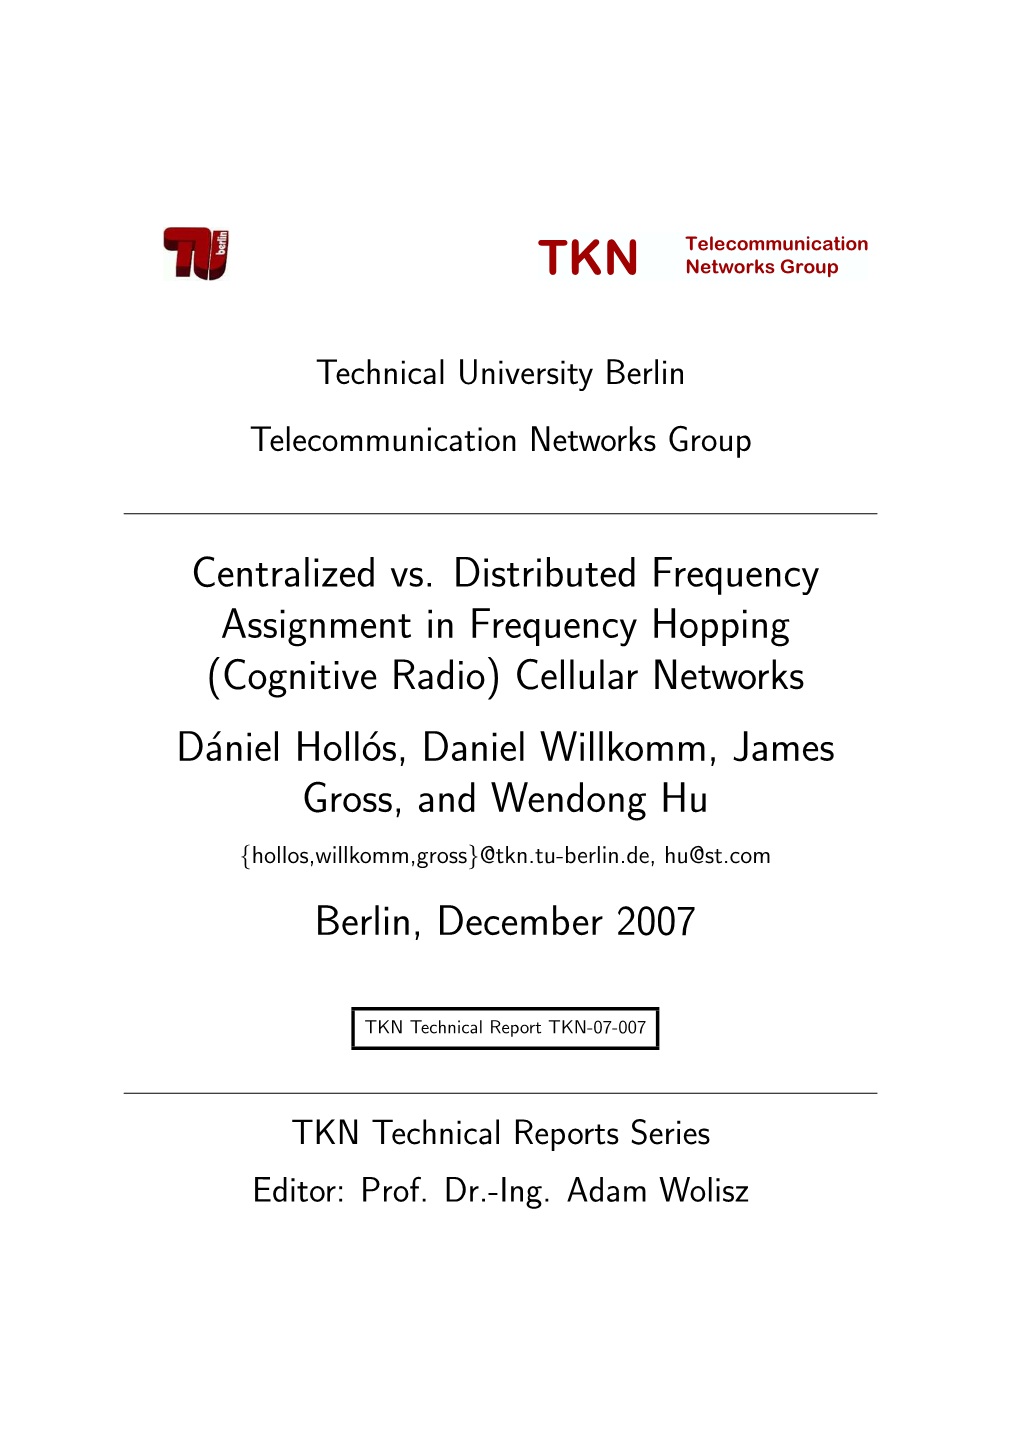 Centralized Vs. Distributed Frequency Assignment in Frequency Hopping (Cognitive Radio) Cellular Networks Dániel Hollós, Danie